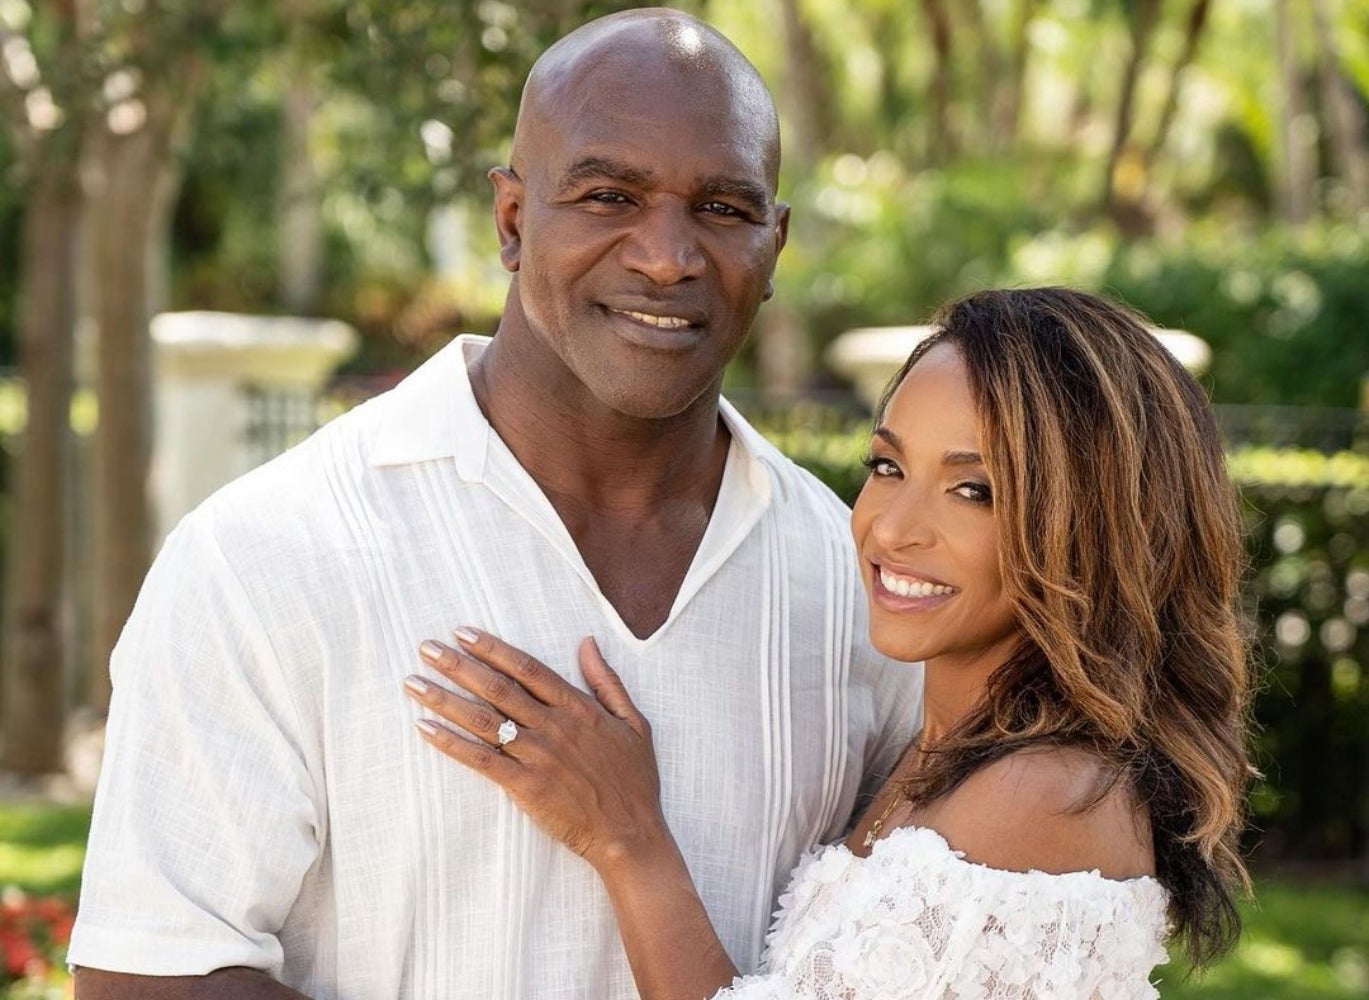 This Week In Black Love: Evander Holyfield Gets Engaged, Bey & Jay Take Venice And More